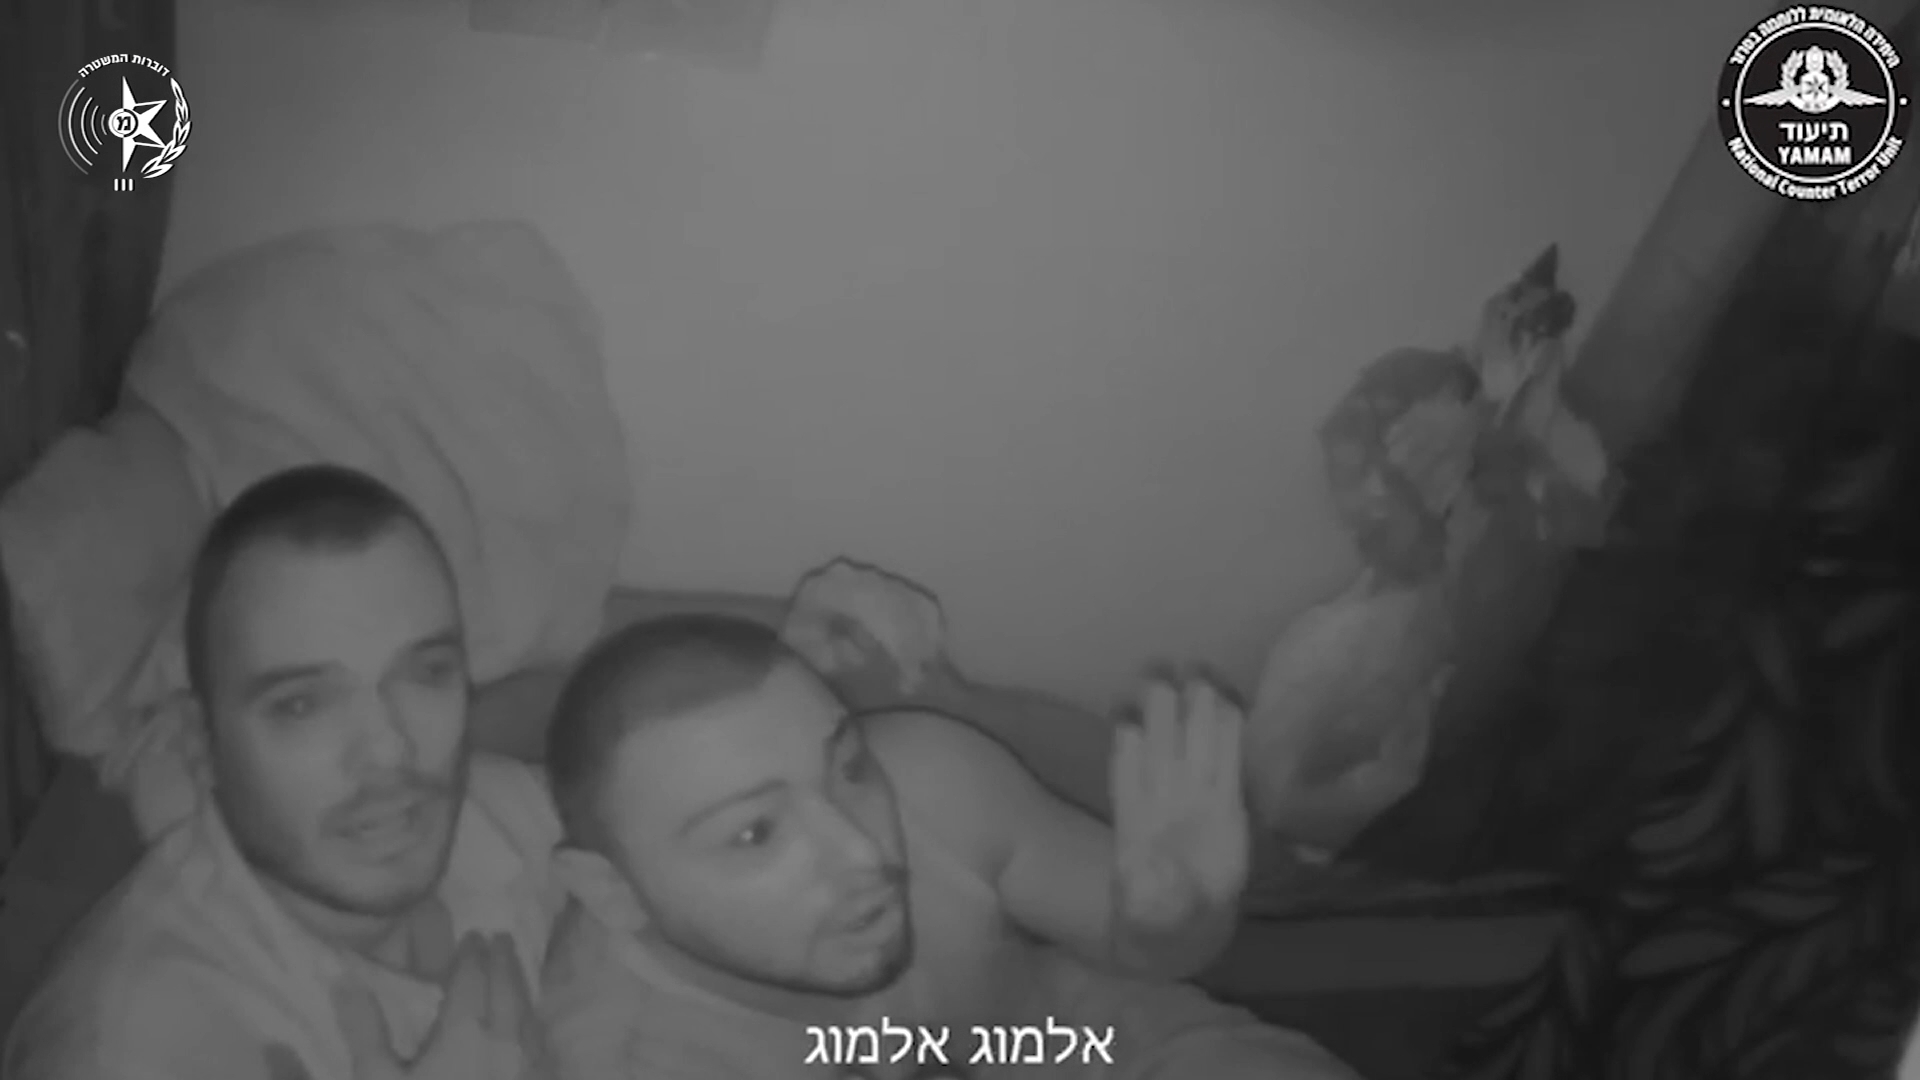 Israeli police released an edited video of the moment when male hostages were rescued in Gaza.